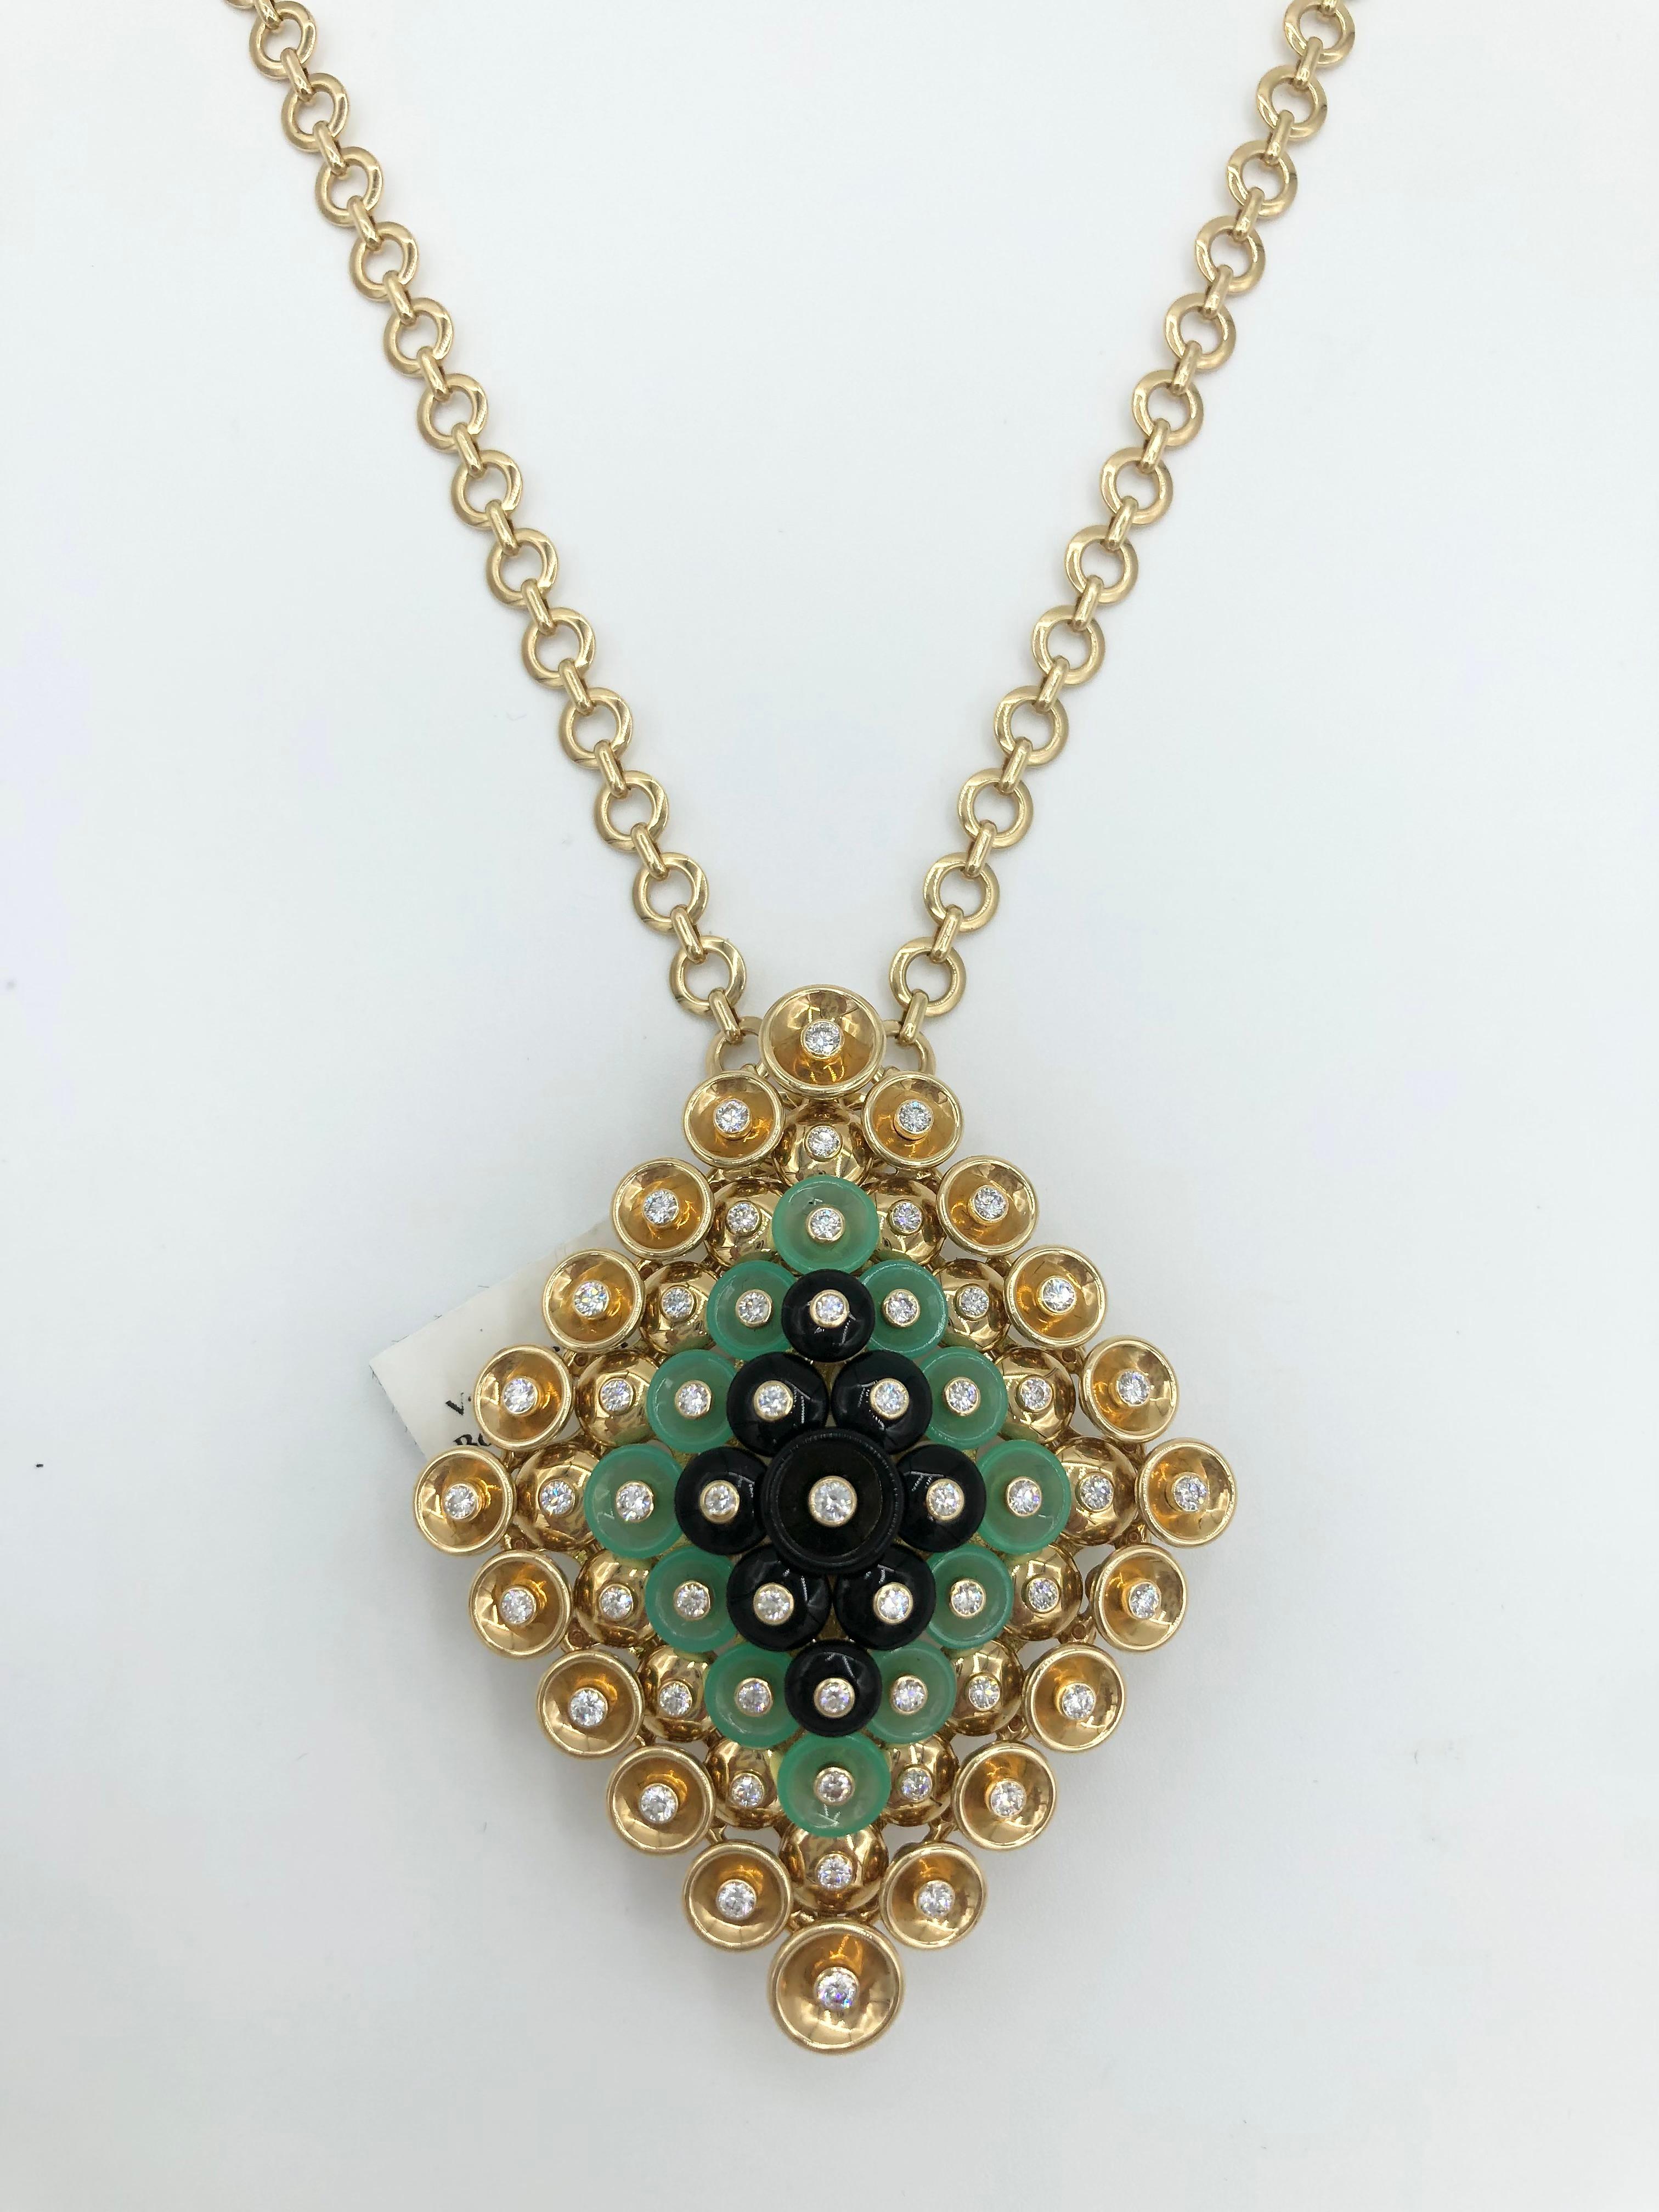 The Van Cleef & Arpels Bouton d'Or Pendant with Detachable Clip 

18K yellow gold, Chrysoprase, Onyx, and round diamonds

57 round diamonds, totaling 1.46 carats, meticulously set in 18K yellow gold. 

Features a detachable clip that allows you to